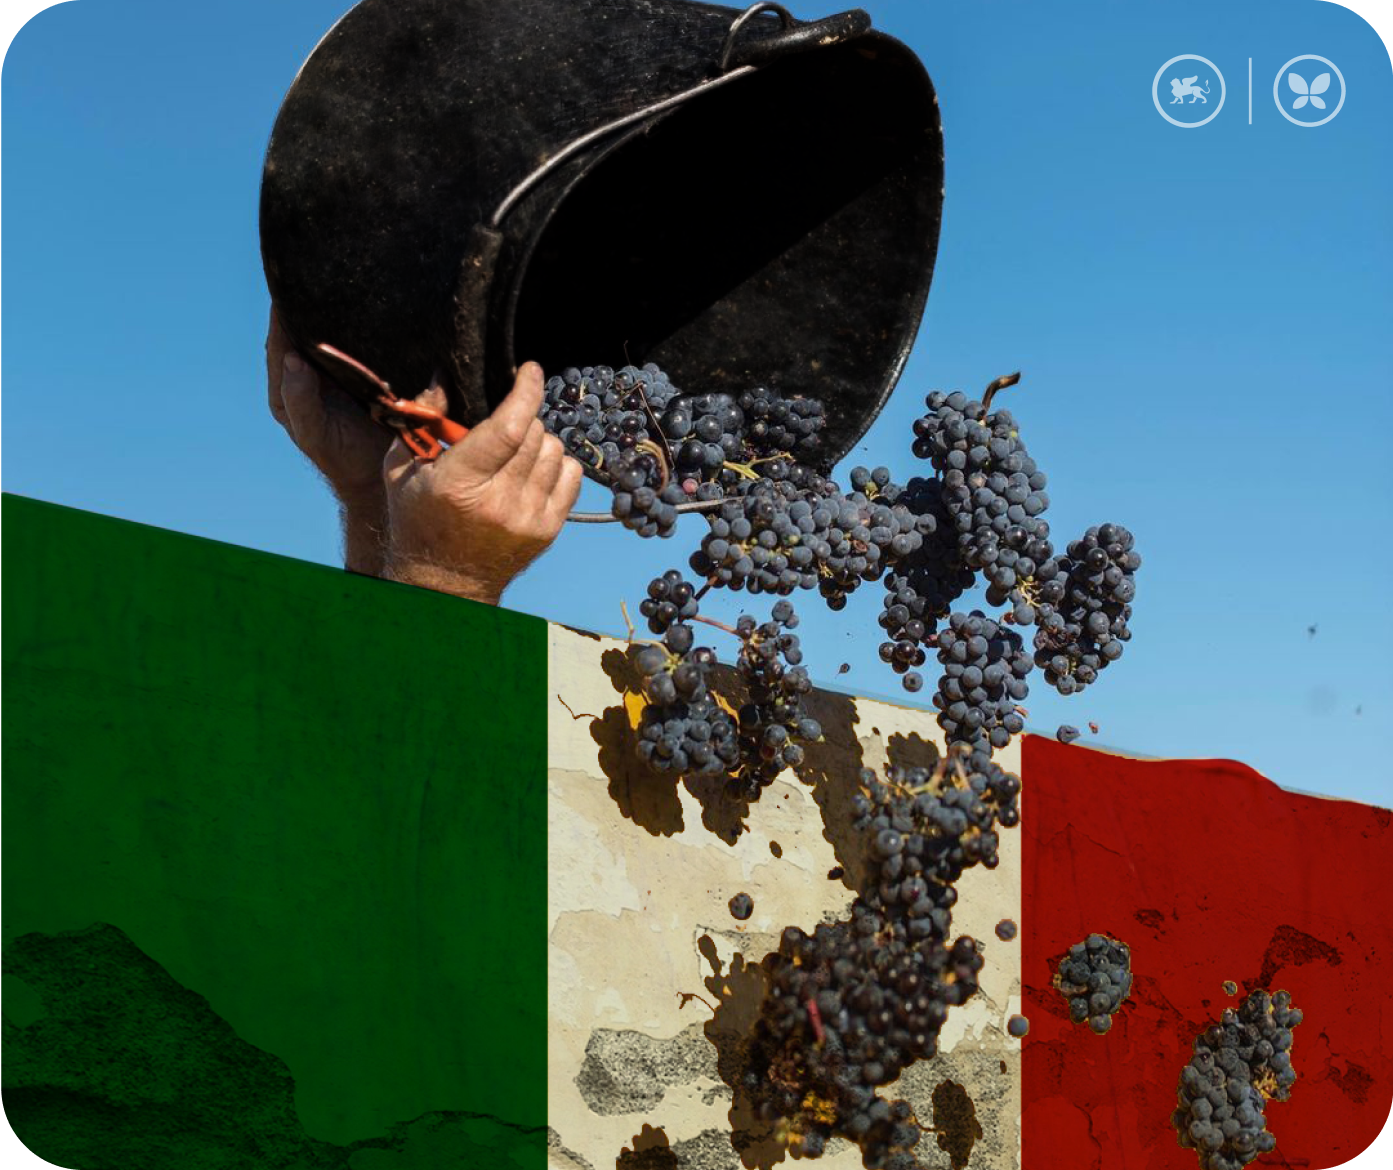 Hand-picked Glera grapes in a bucket next to a wall painted with Italian flag colors.